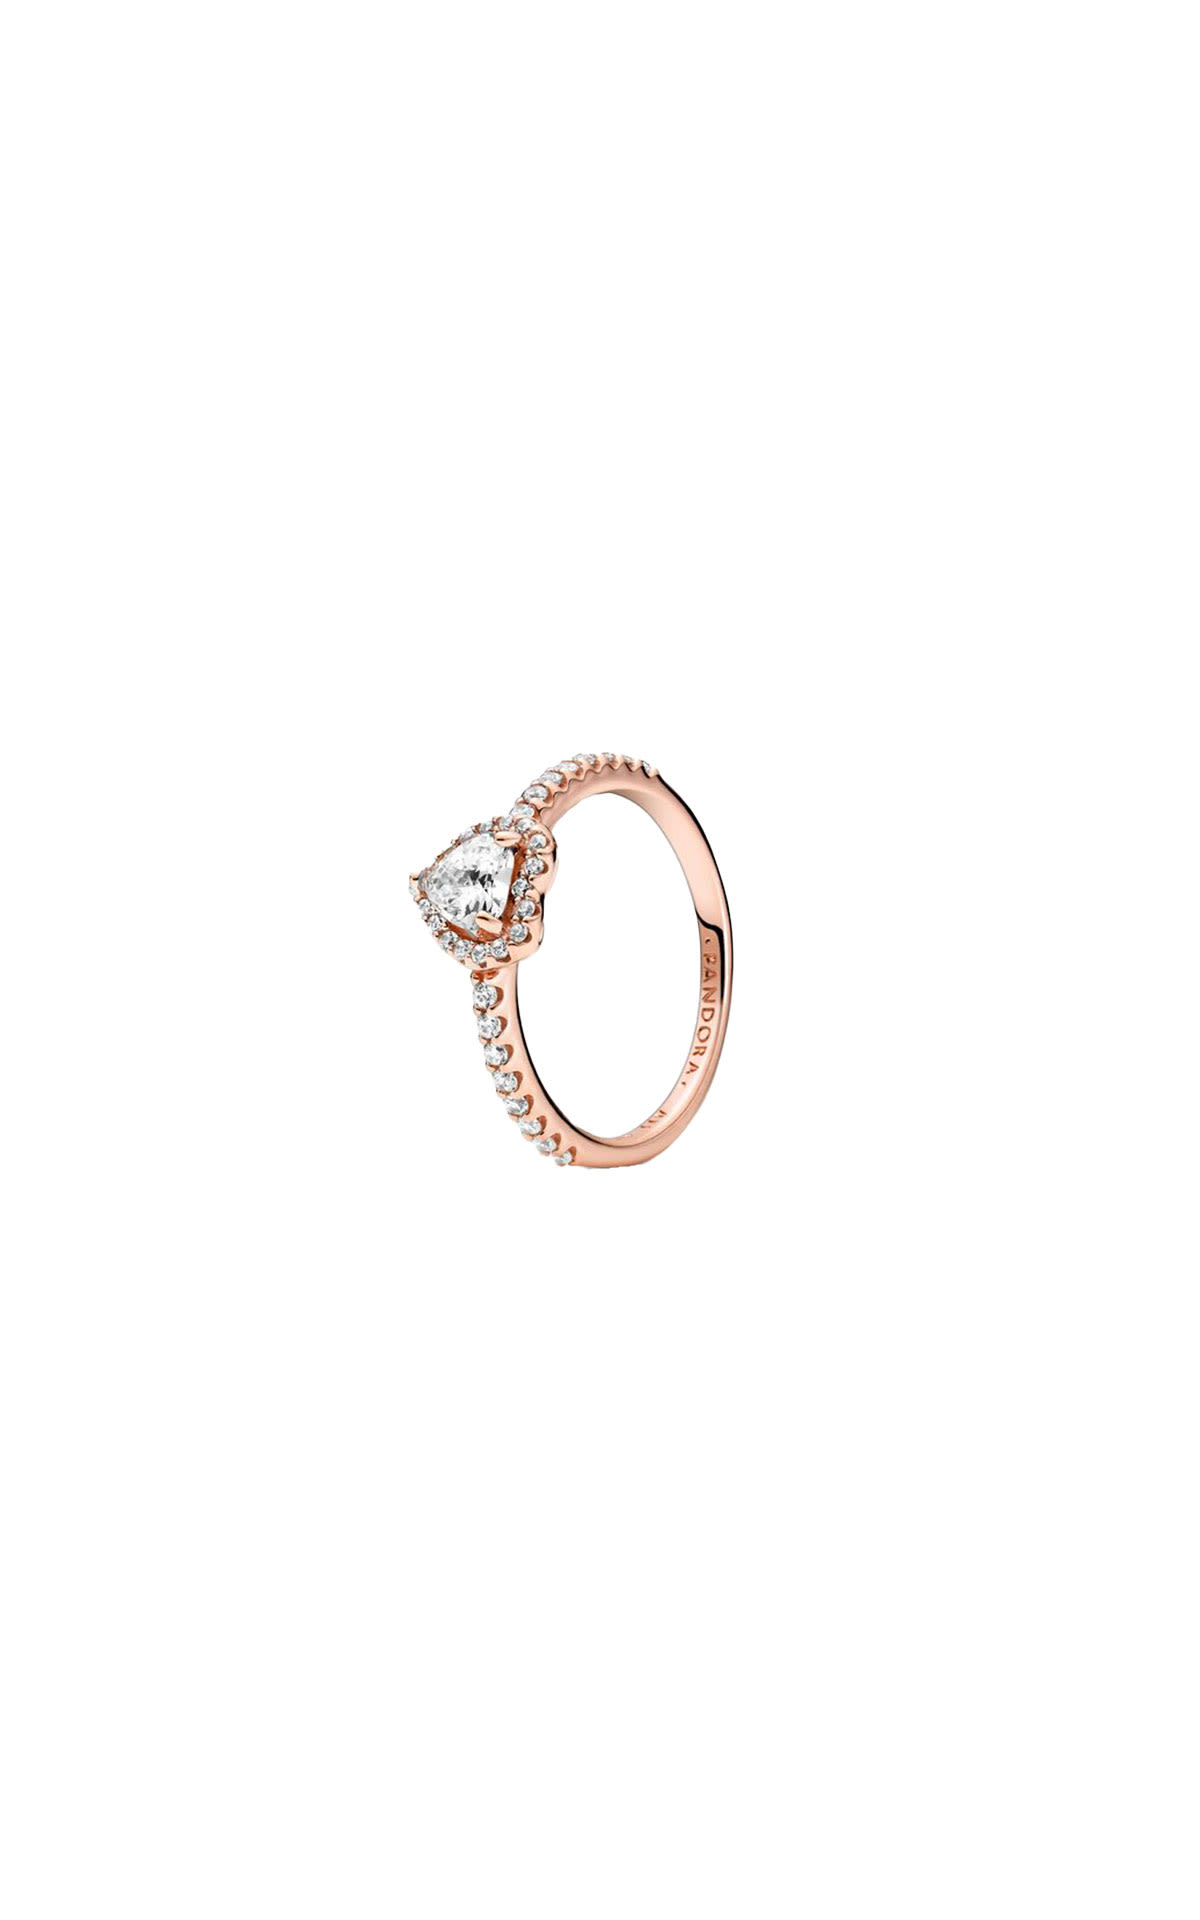 Pandora Sparkling elevate heart ring from Bicester Village